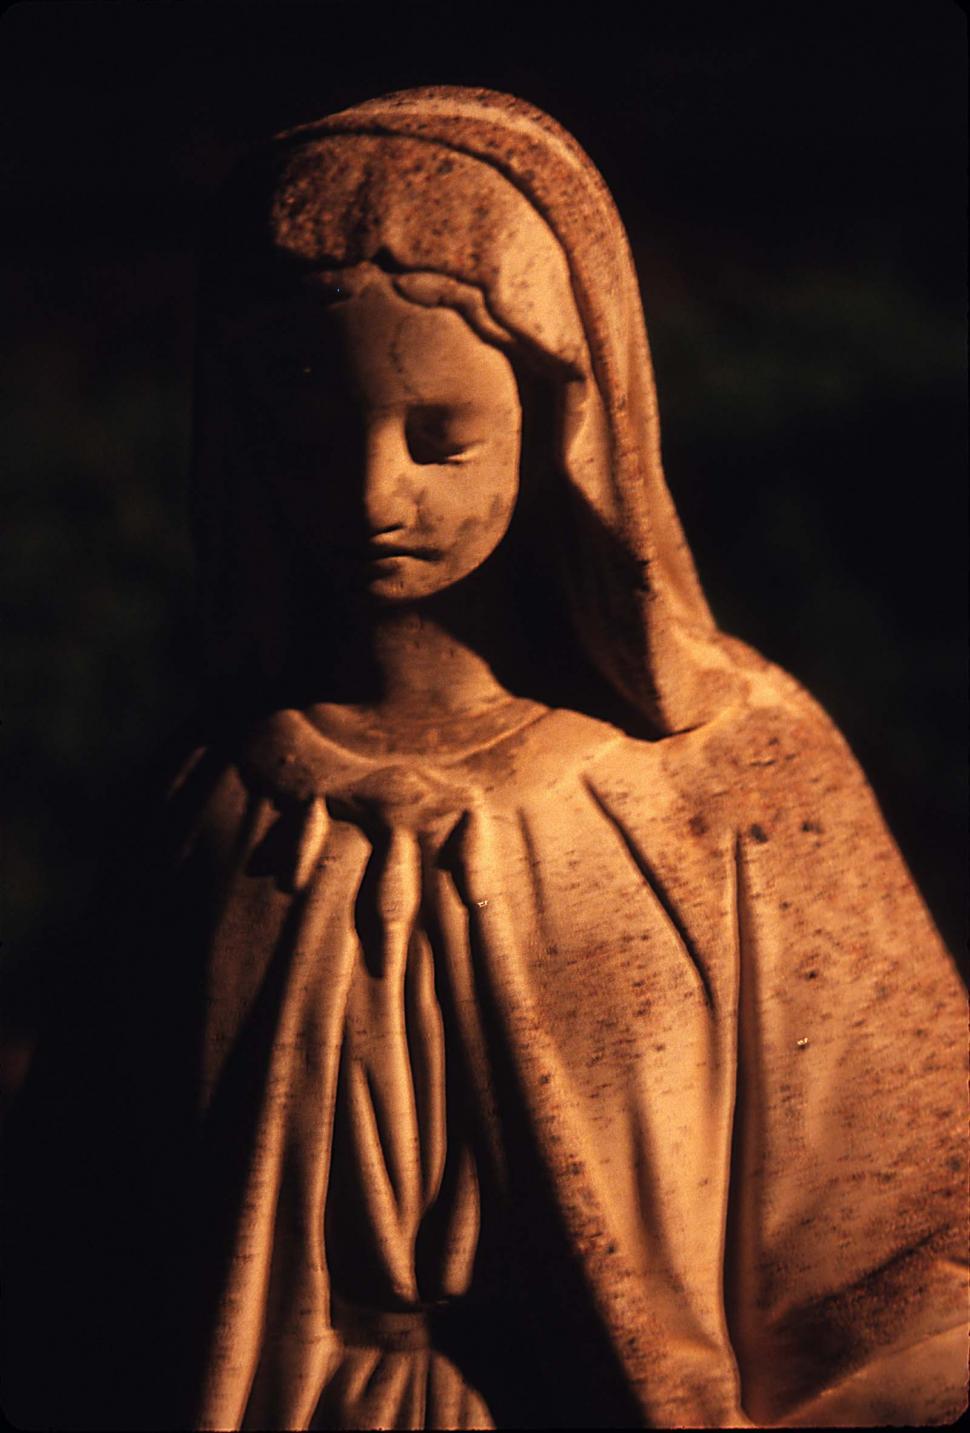 Free Image of Virgin Mary statue 